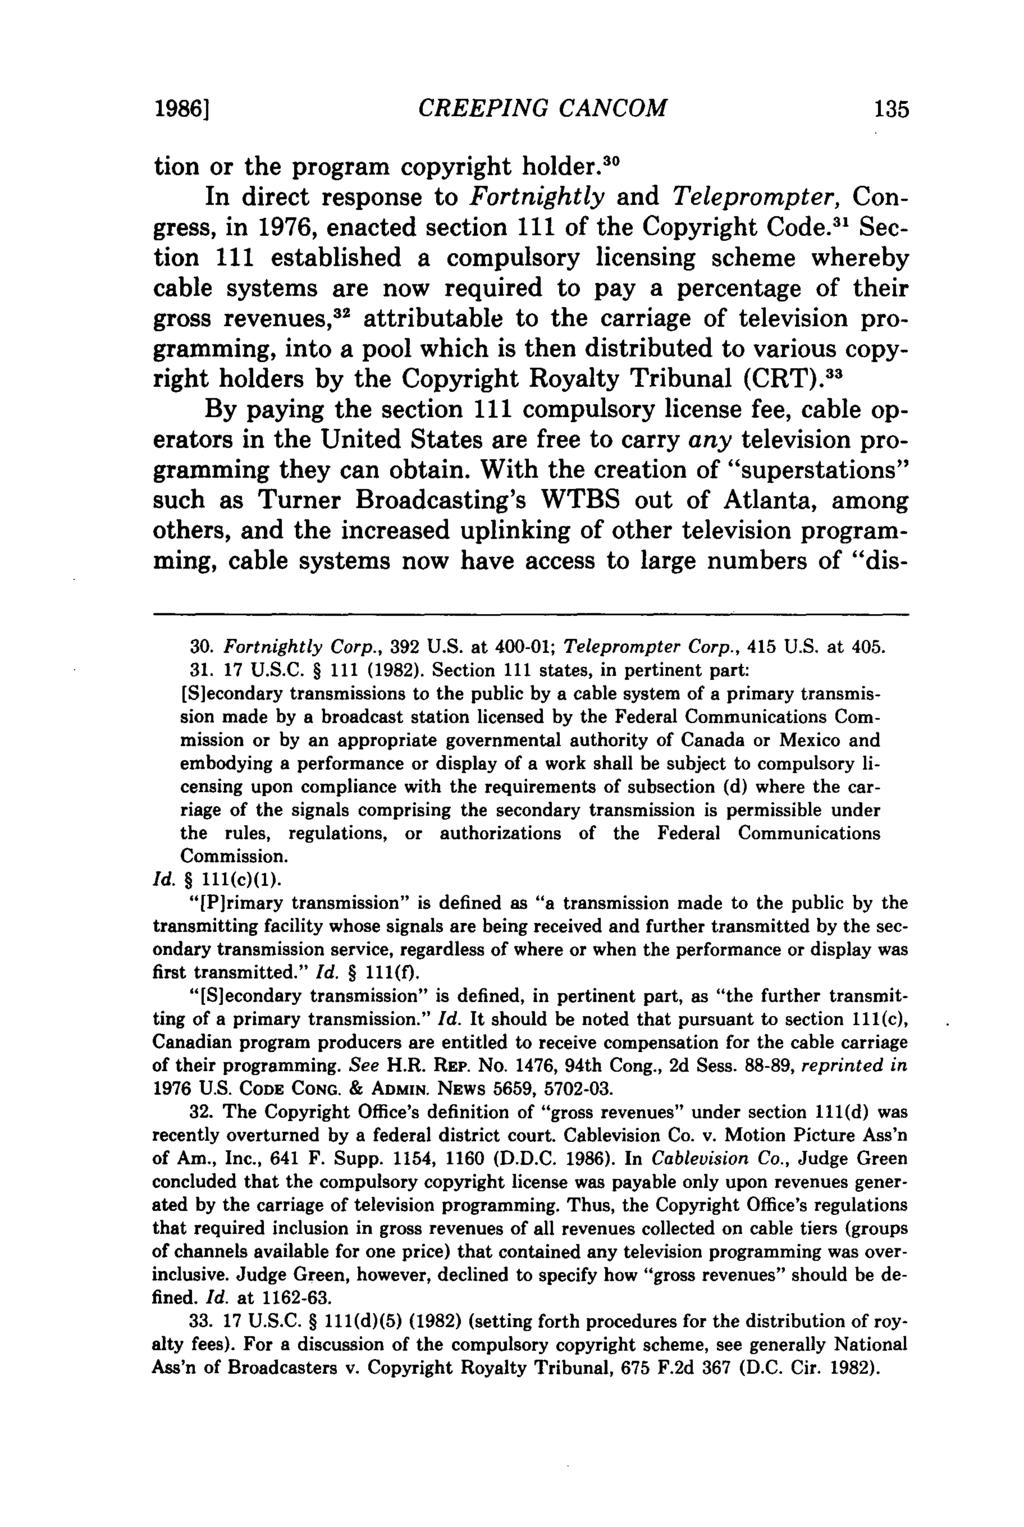 1986] CREEPING CANCOM tion or the program copyright holder. 3 0 In direct response to Fortnightly and Teleprompter, Congress, in 1976, enacted section 111 of the Copyright Code.